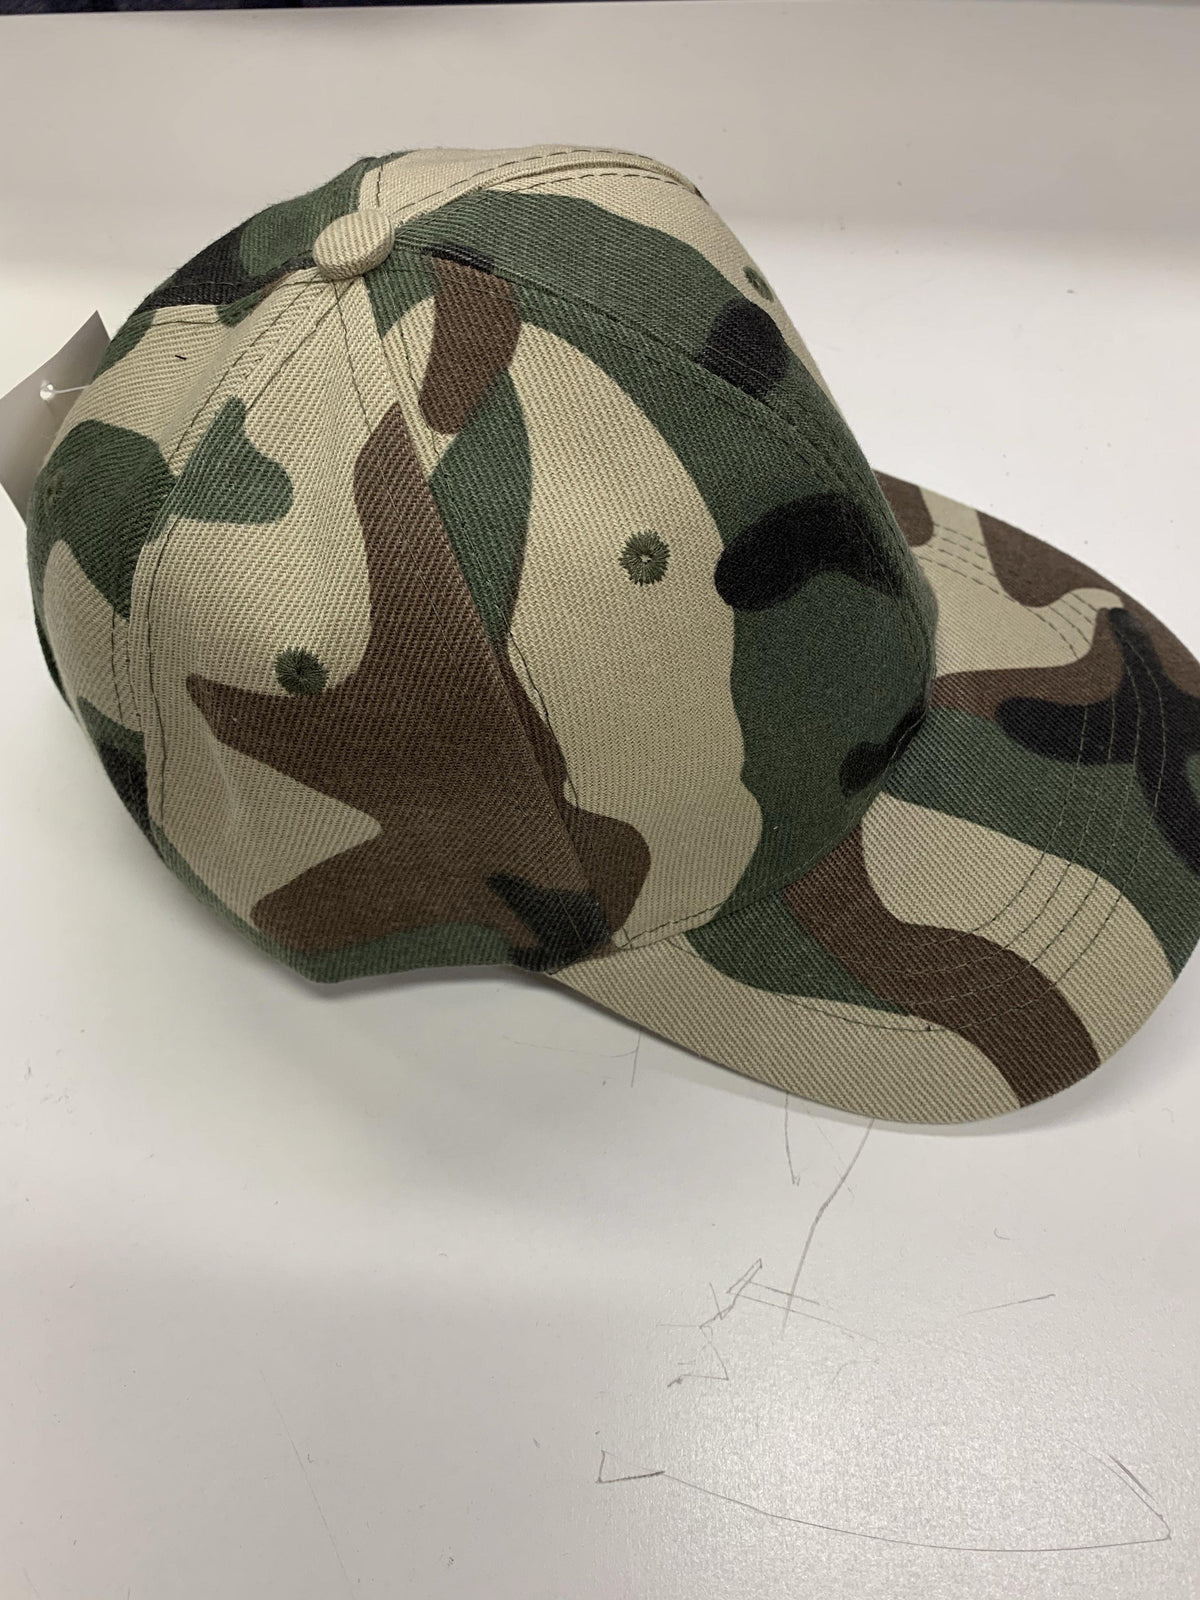 camo print cap hat for soilder costume or every day wear